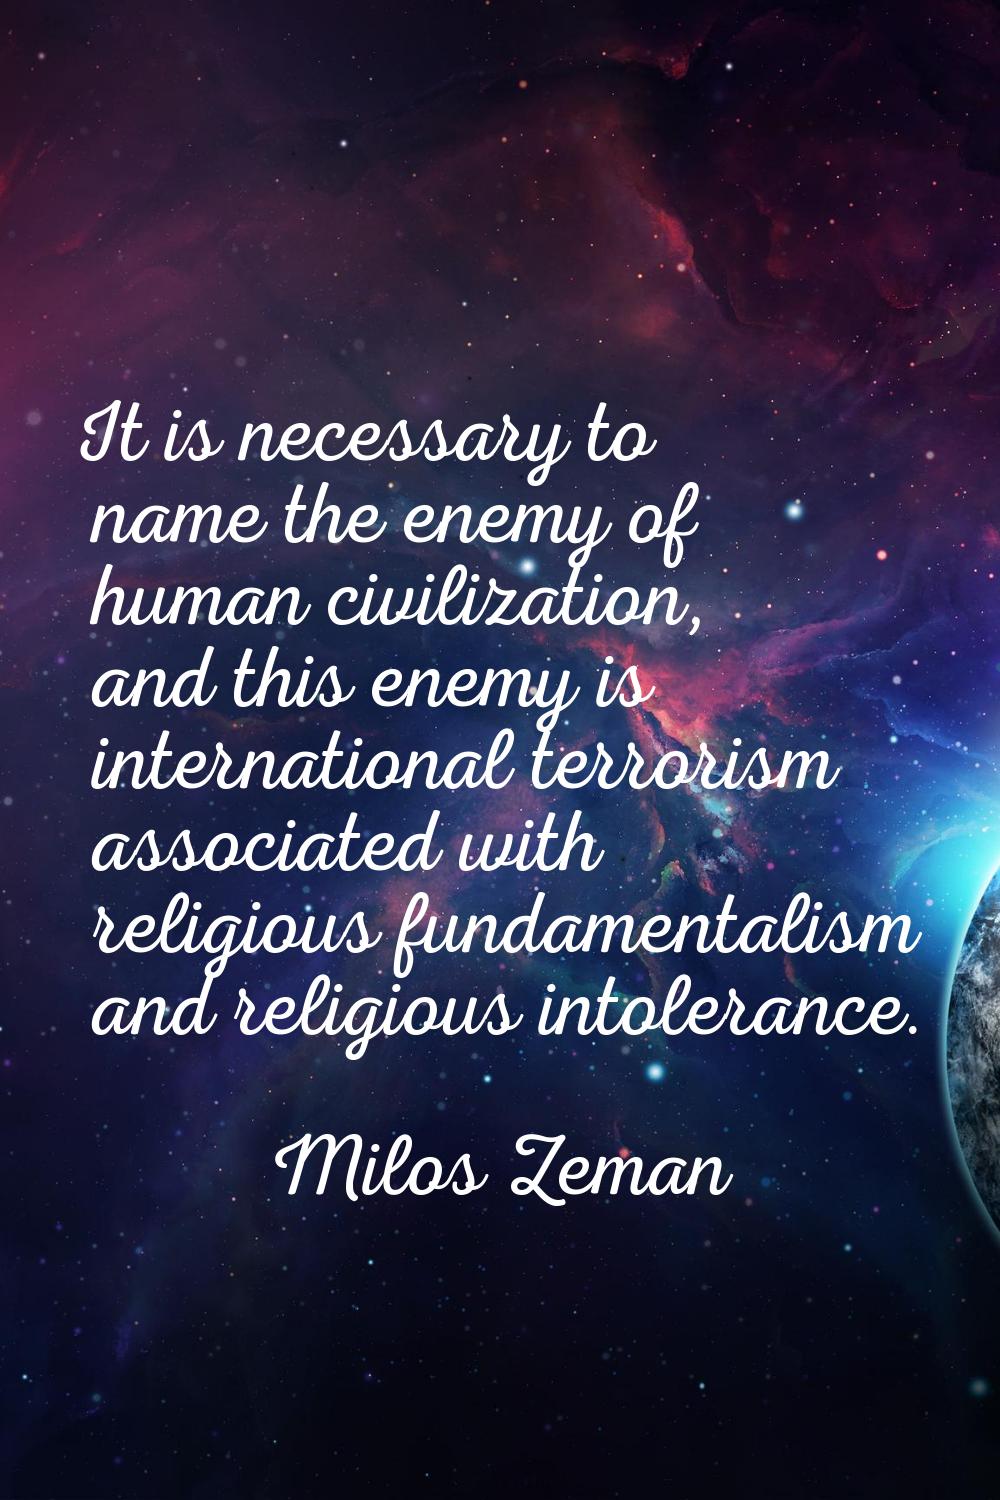 It is necessary to name the enemy of human civilization, and this enemy is international terrorism 